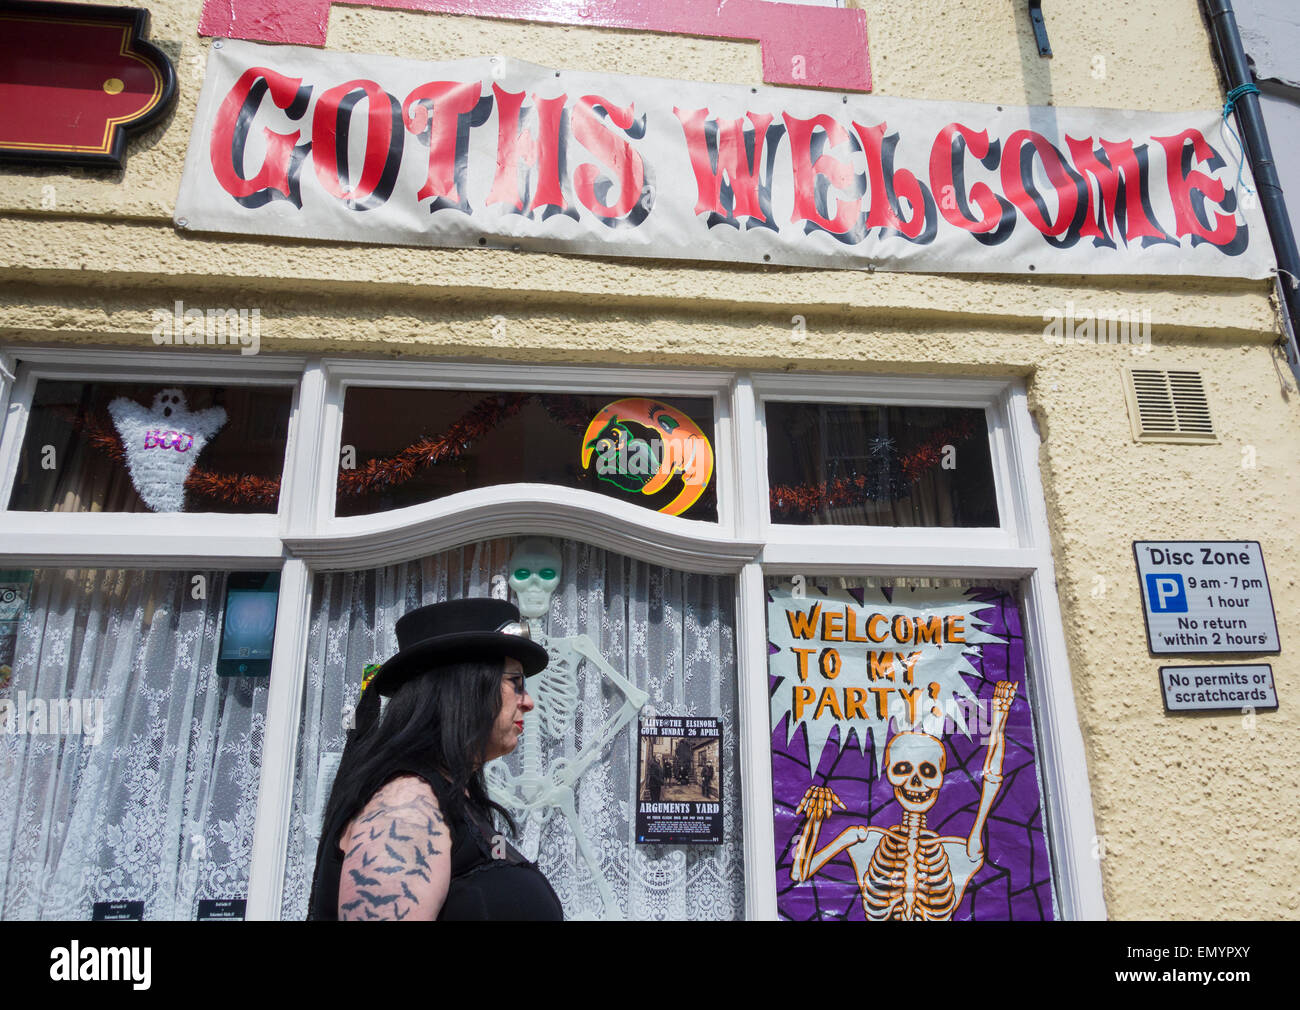 Whitby, North Yorkshire, UK. 24th April 2015.  Goth walking past pub in Whitby on a glorious day at Whitby as Goths, Steampunks, Metalers... gather in glorious sunshine on Friday at the famous Whitby Goth festival. (23rd - 26th April). Credit:  ALANDAWSONPHOTOGRAPHY/Alamy Live News Stock Photo